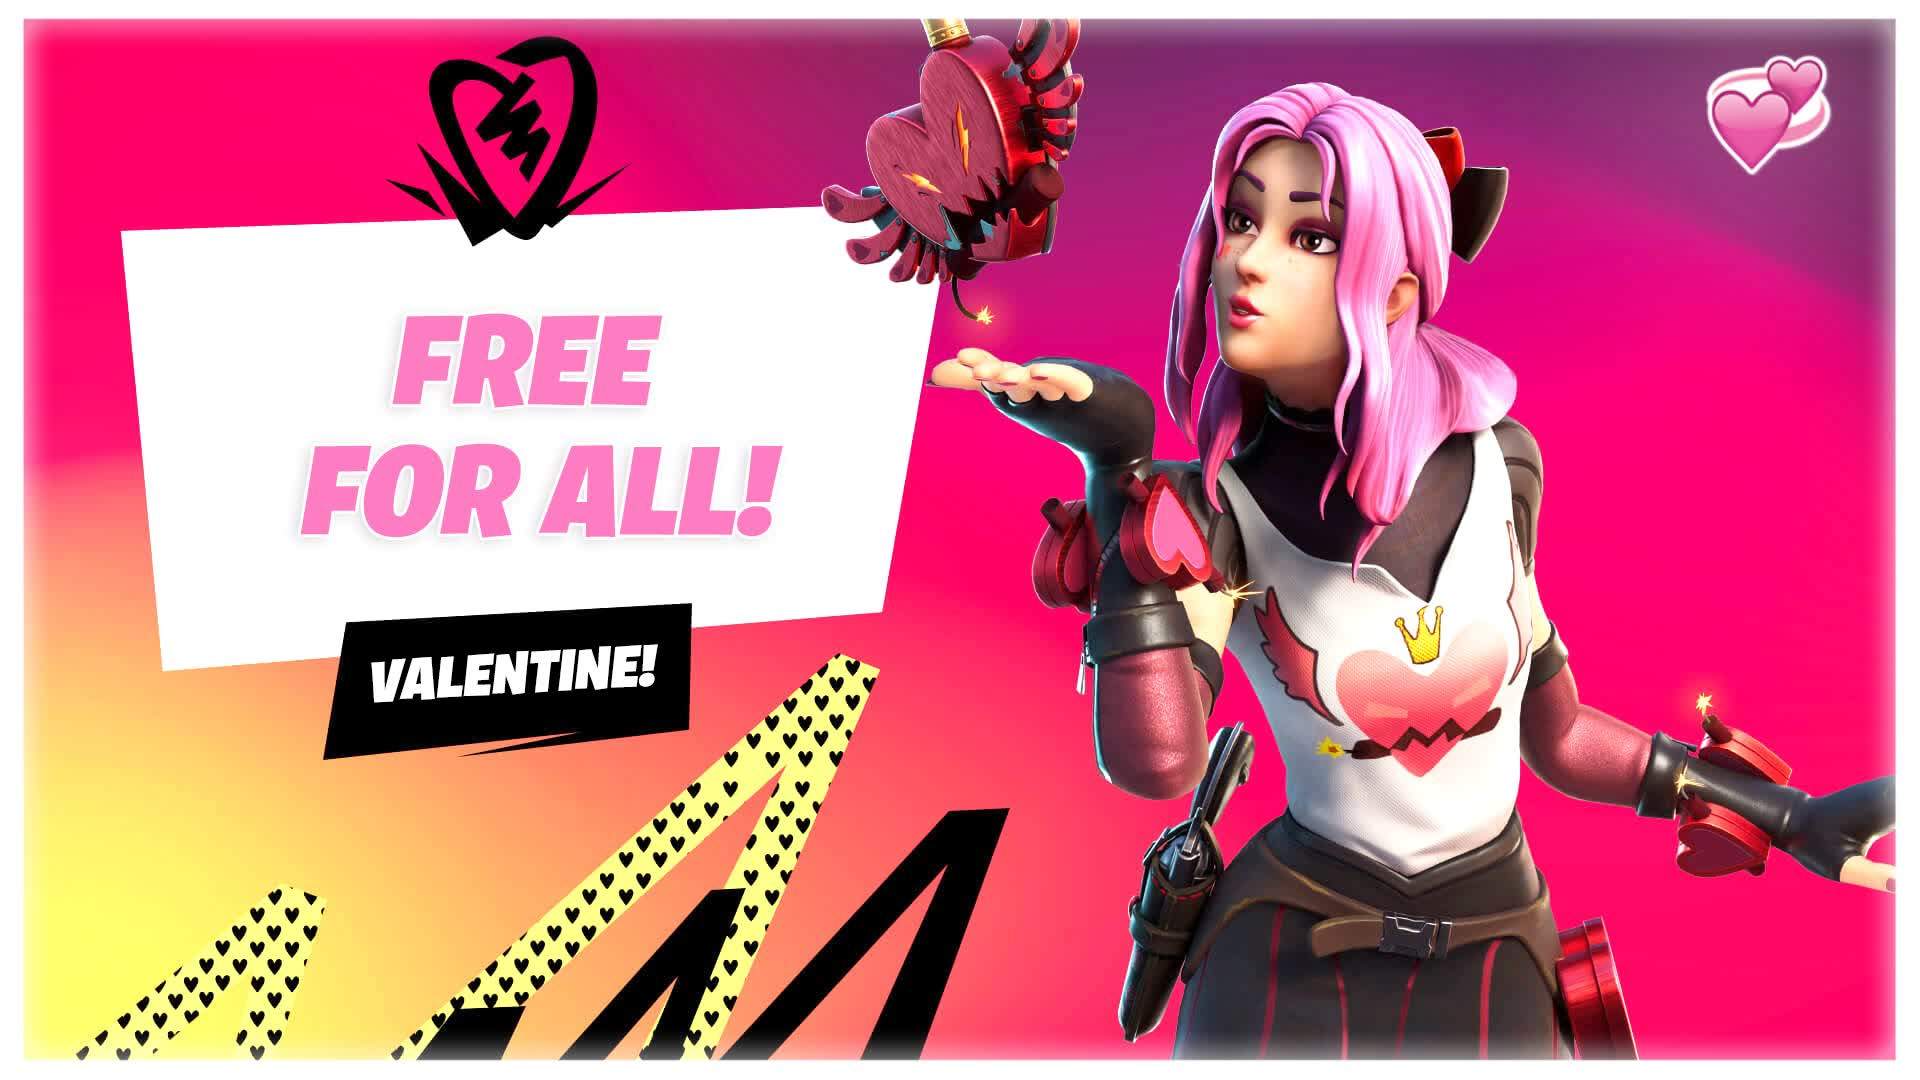 💞Valentines - FREE FOR ALL💗